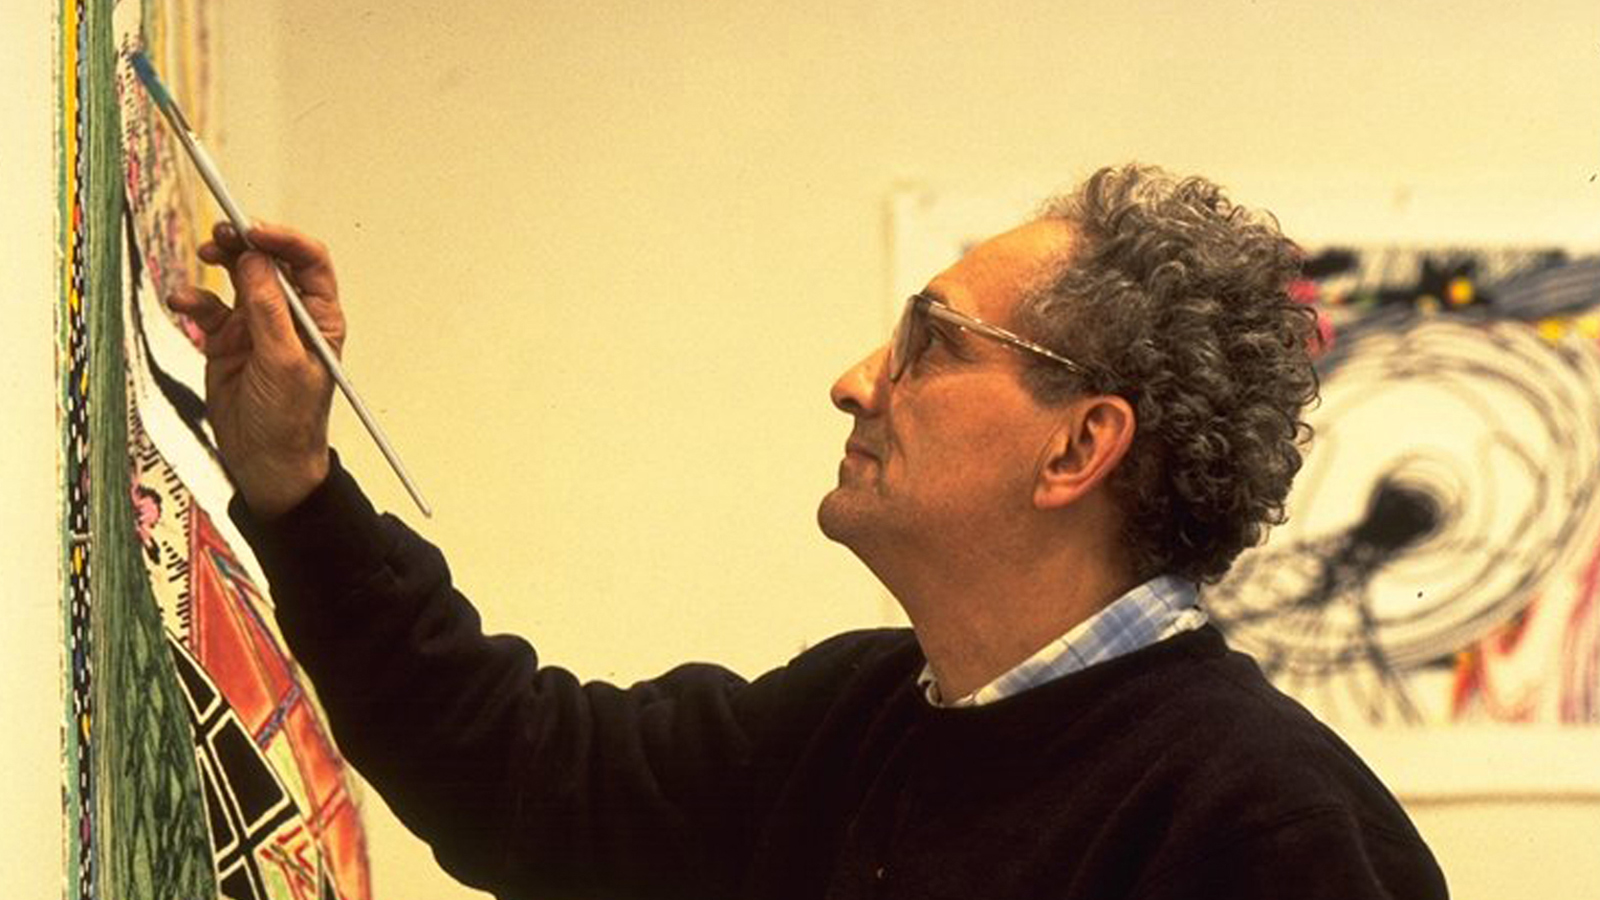 Color photo of the profile of a light skinned man with an arm upraised and hand holding a paintbrush to a canvas on the wall